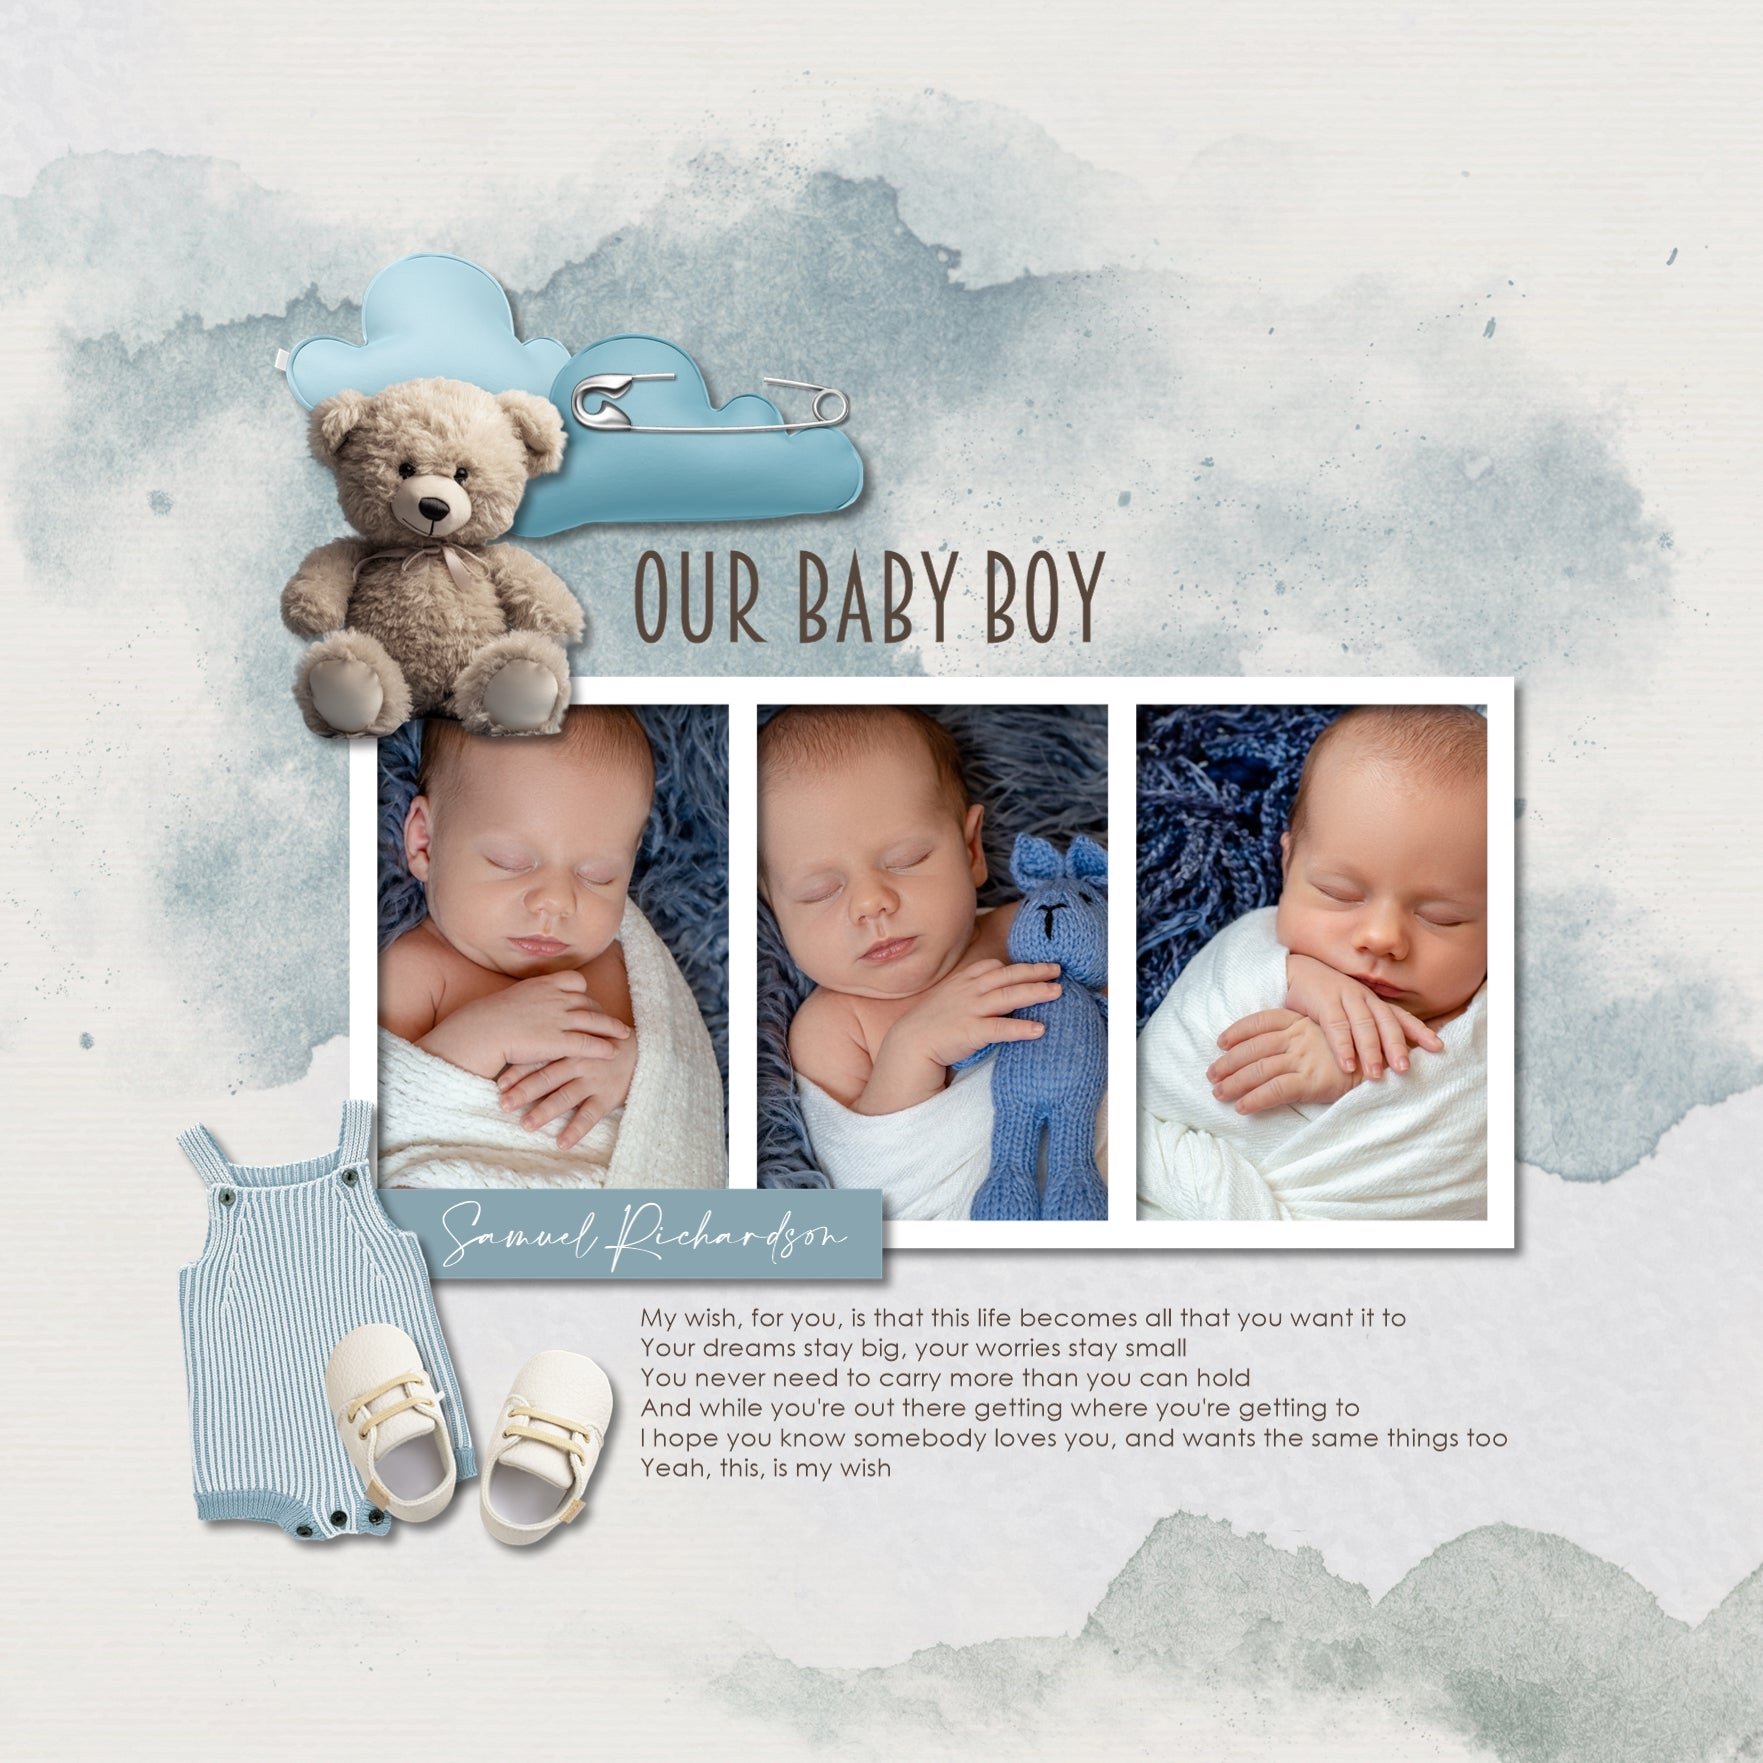 Capture the special moments of your baby through the toddler years with these pastel children's digital scrapbooking embellishments by Lucky Girl Creative digital art. Create unique baby announcements, baby shower gifts, and even Baby's 1st Year, ABC books, and toddler albums.